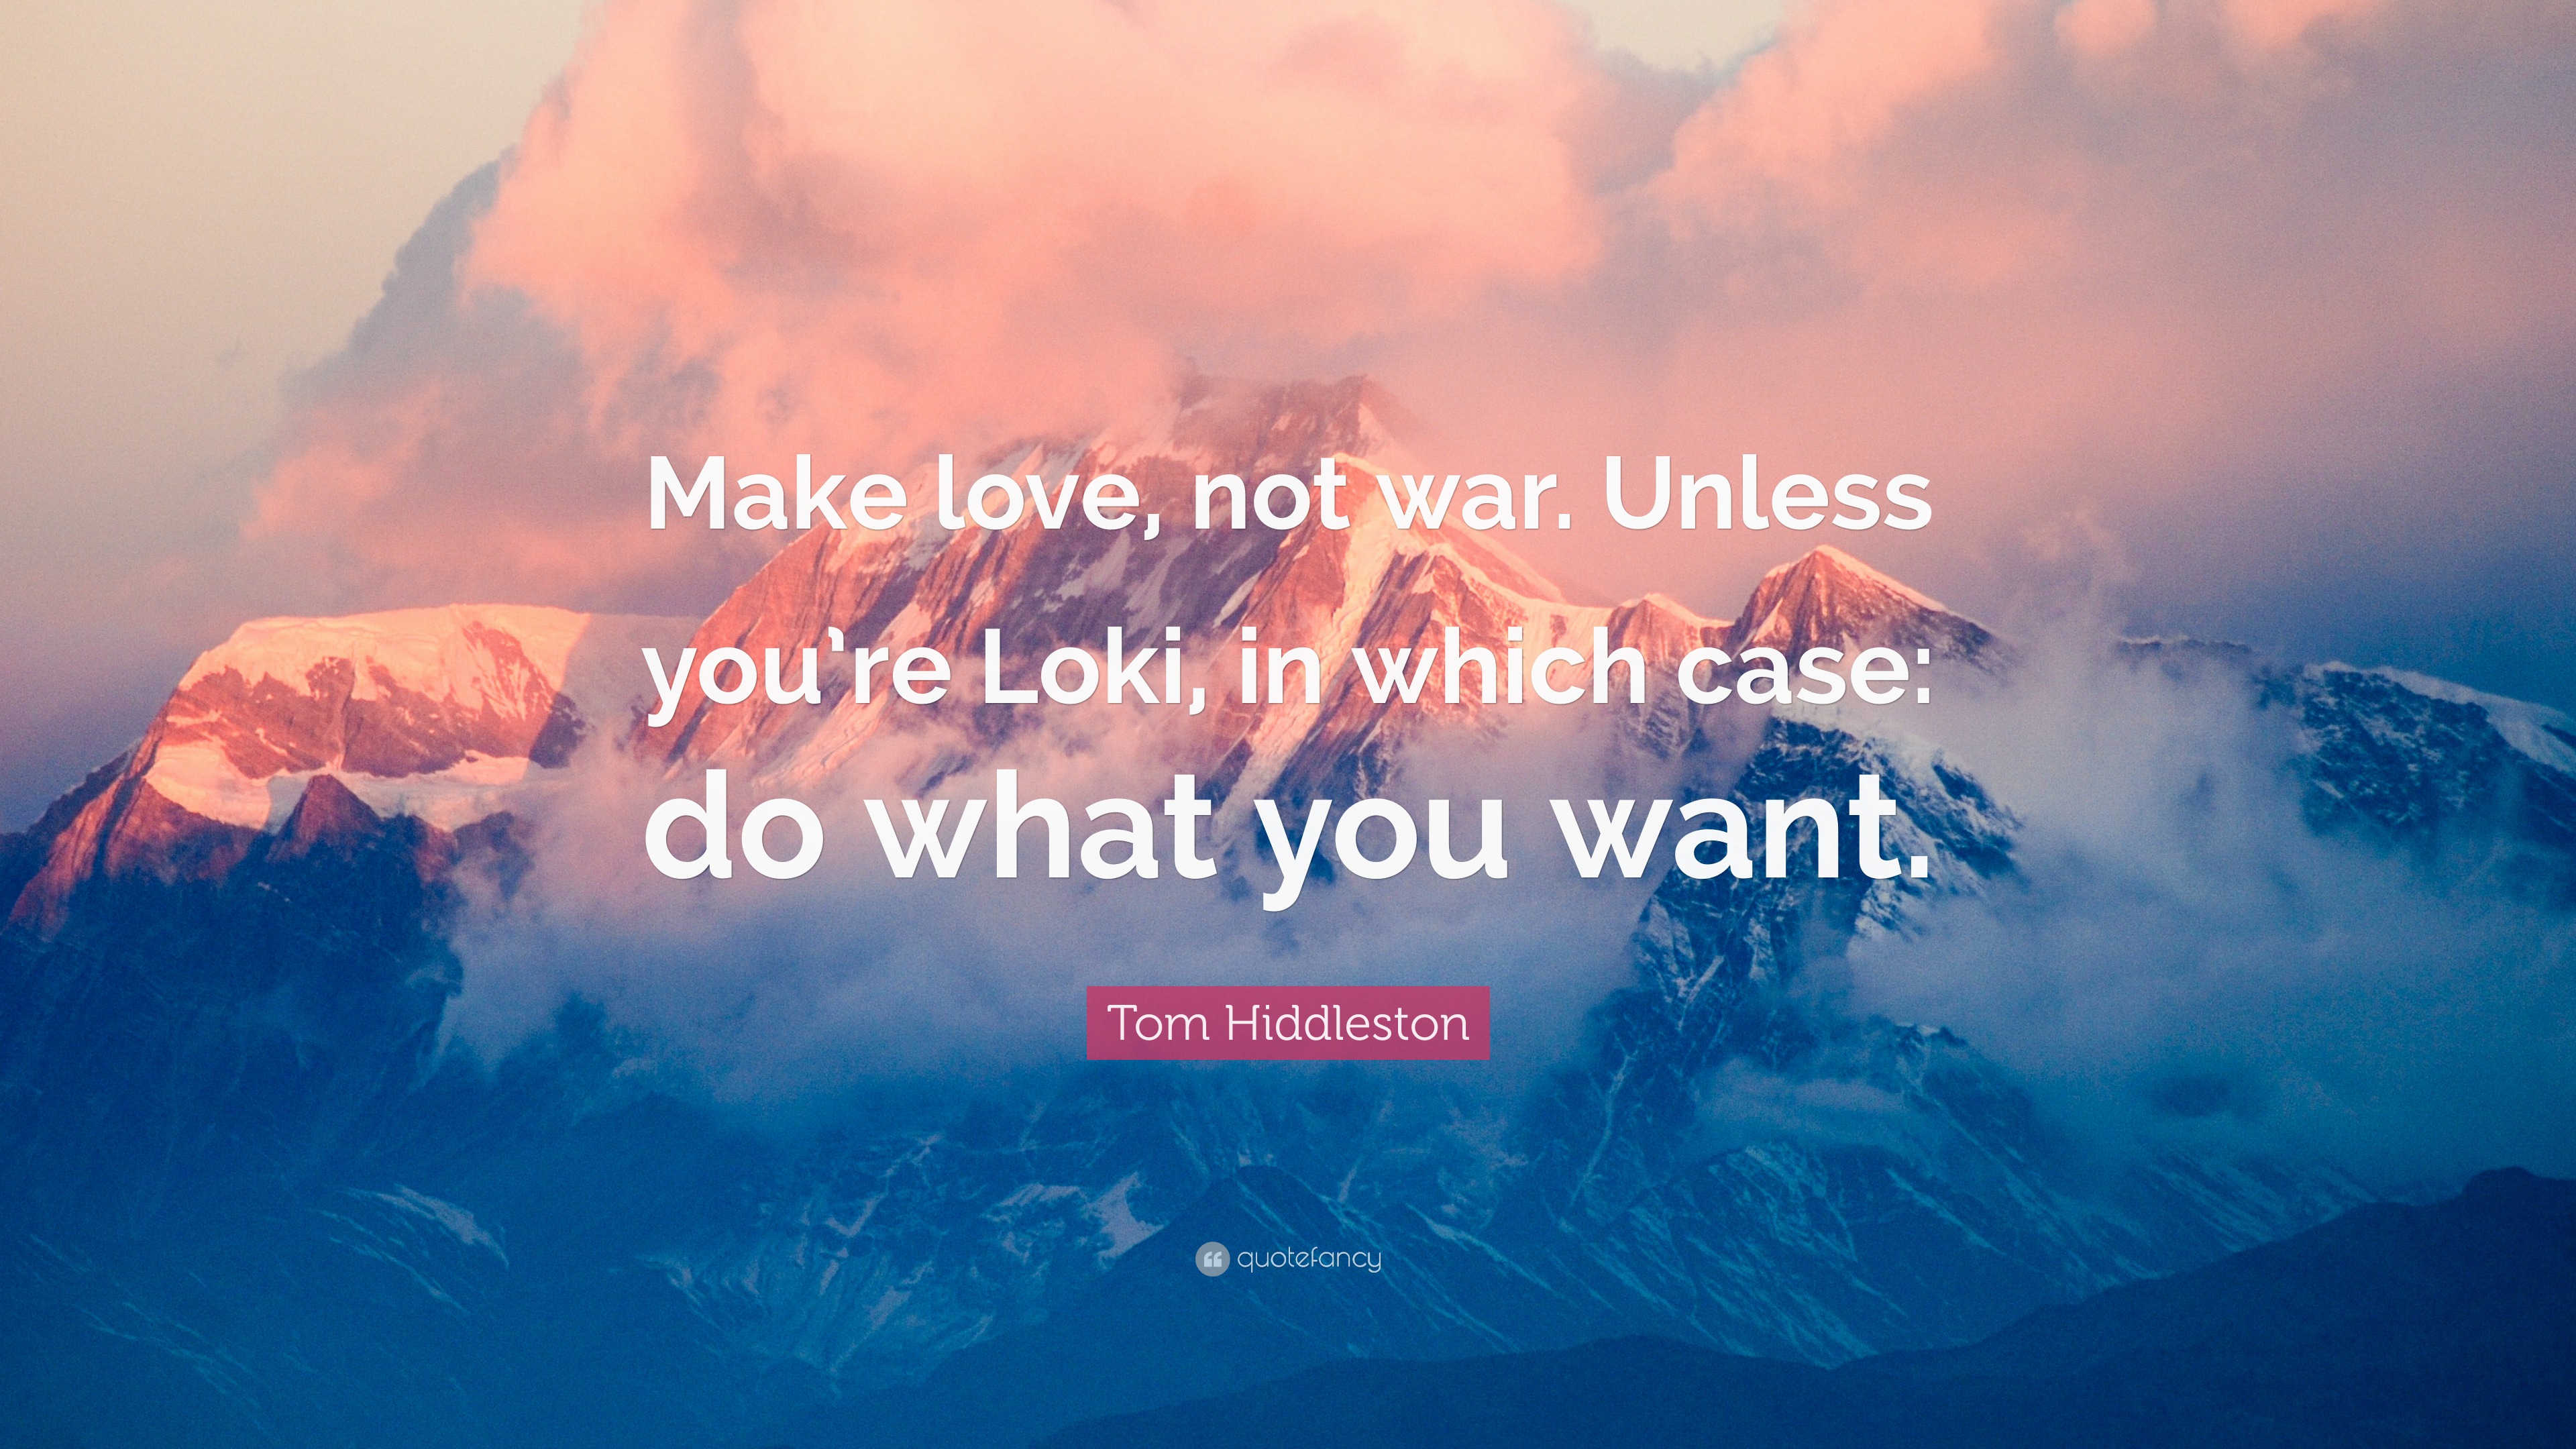 Tom Hiddleston Quote: “Make love, not war. Unless you’re Loki, in which ...